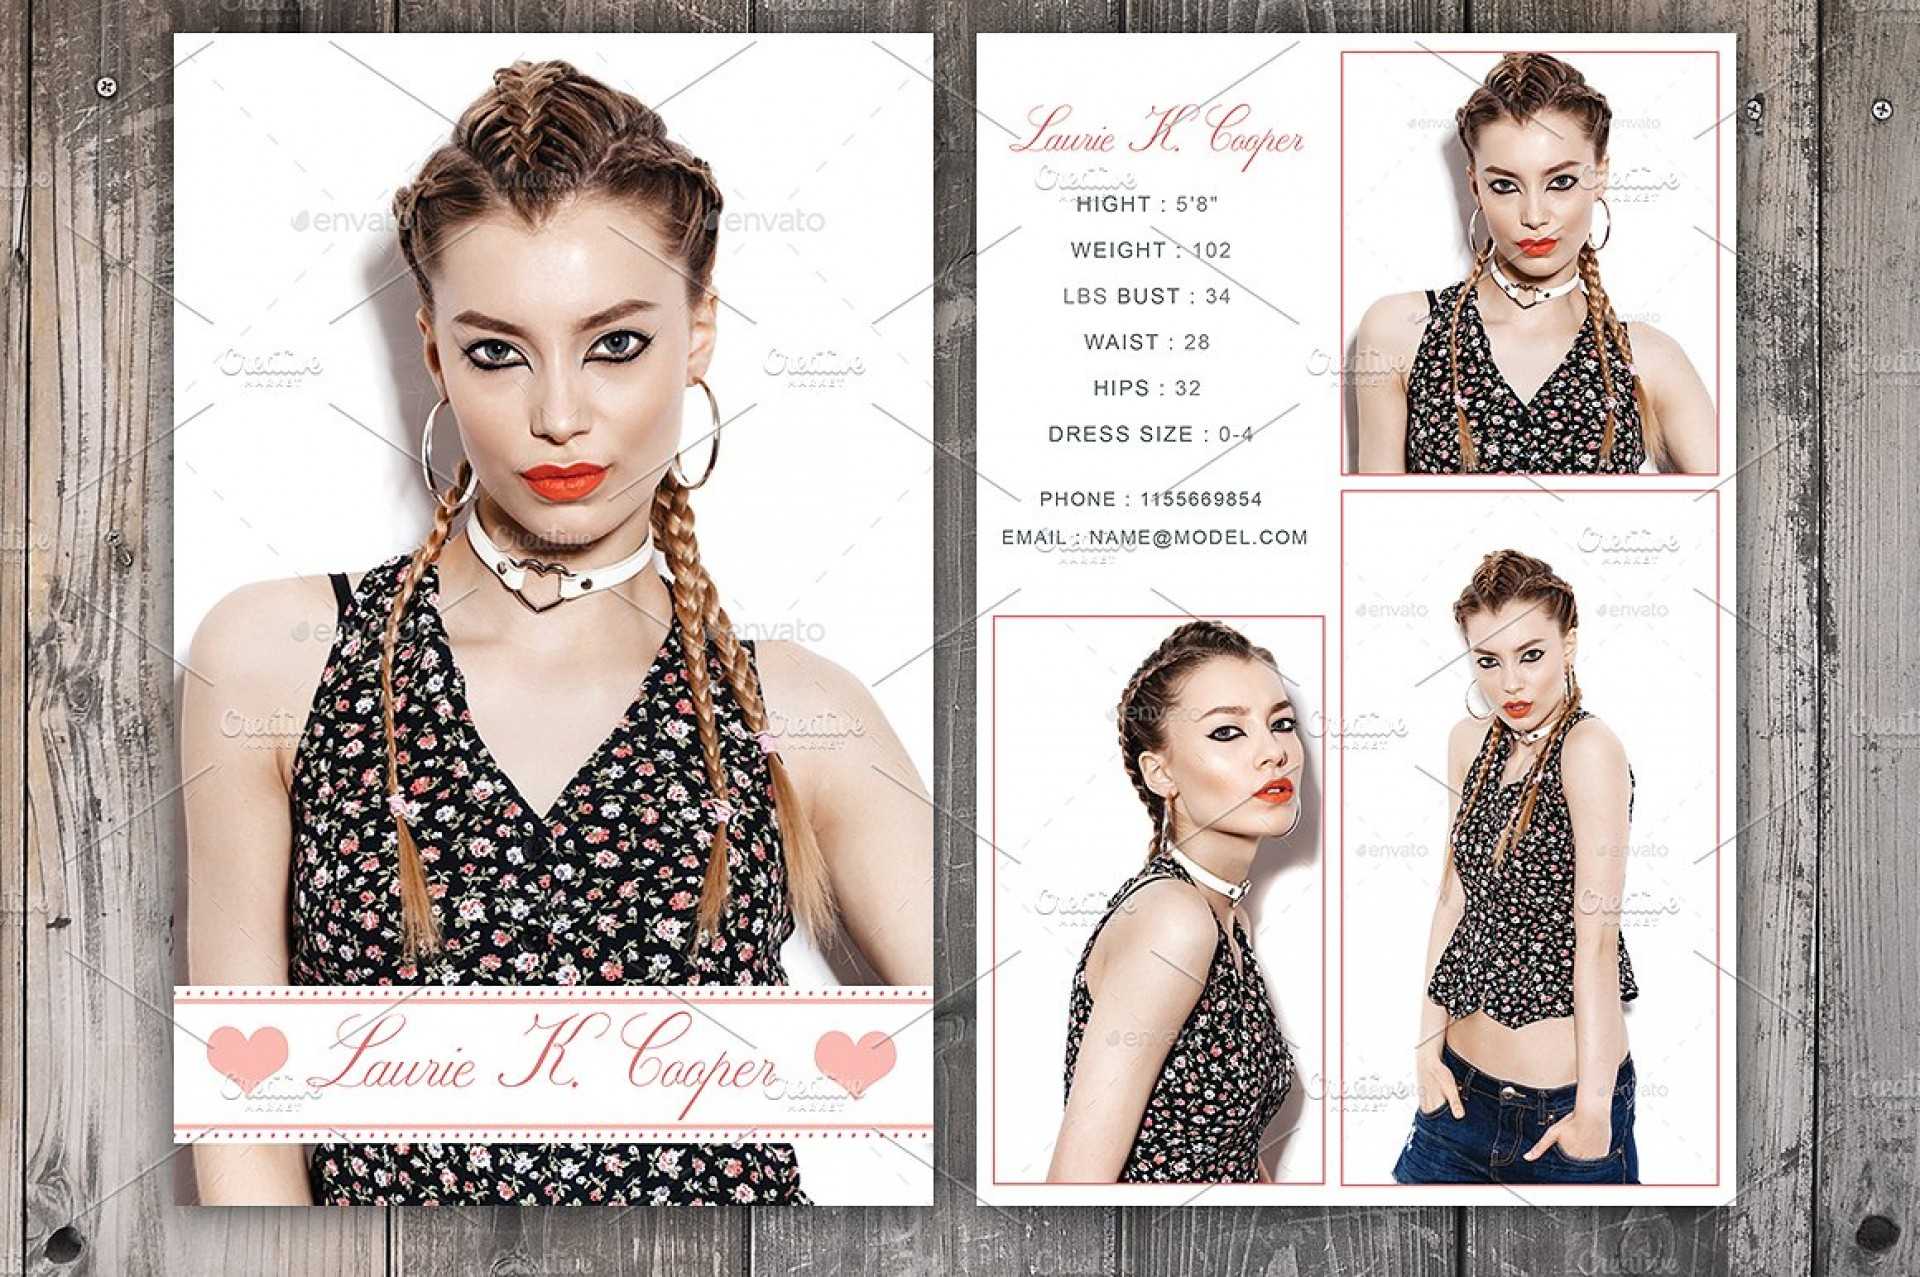 Download Comp Card Template – Atlantaauctionco With Regard To Free Model Comp Card Template